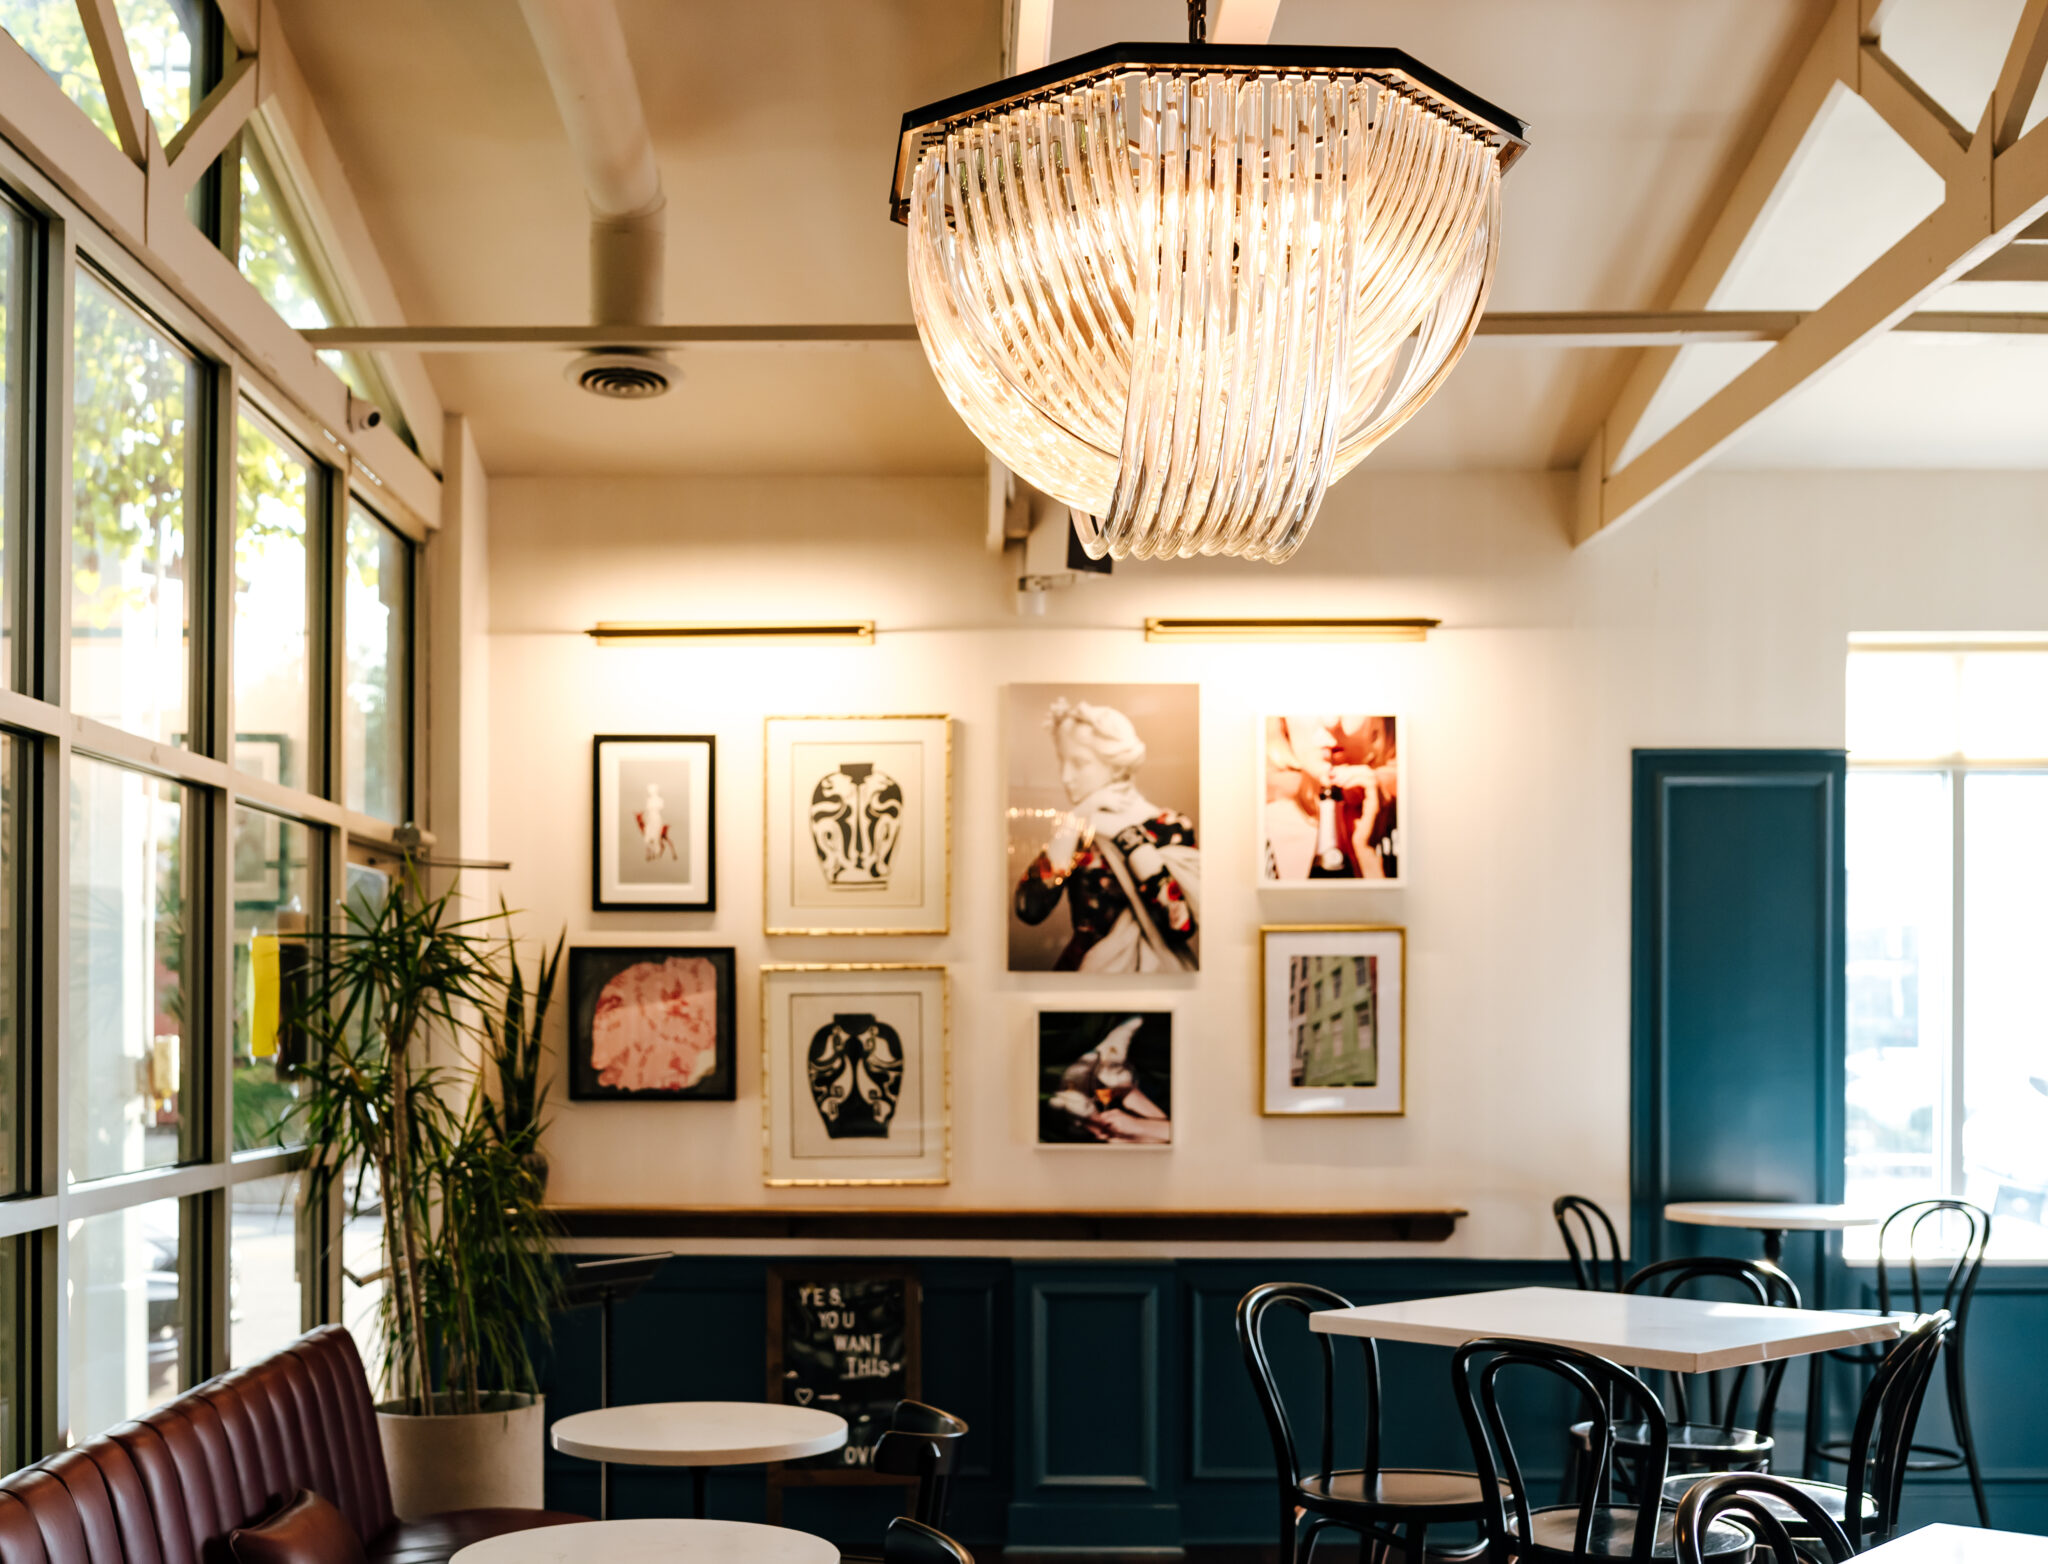 Photograph of a classy wine bar with an art gallery wall